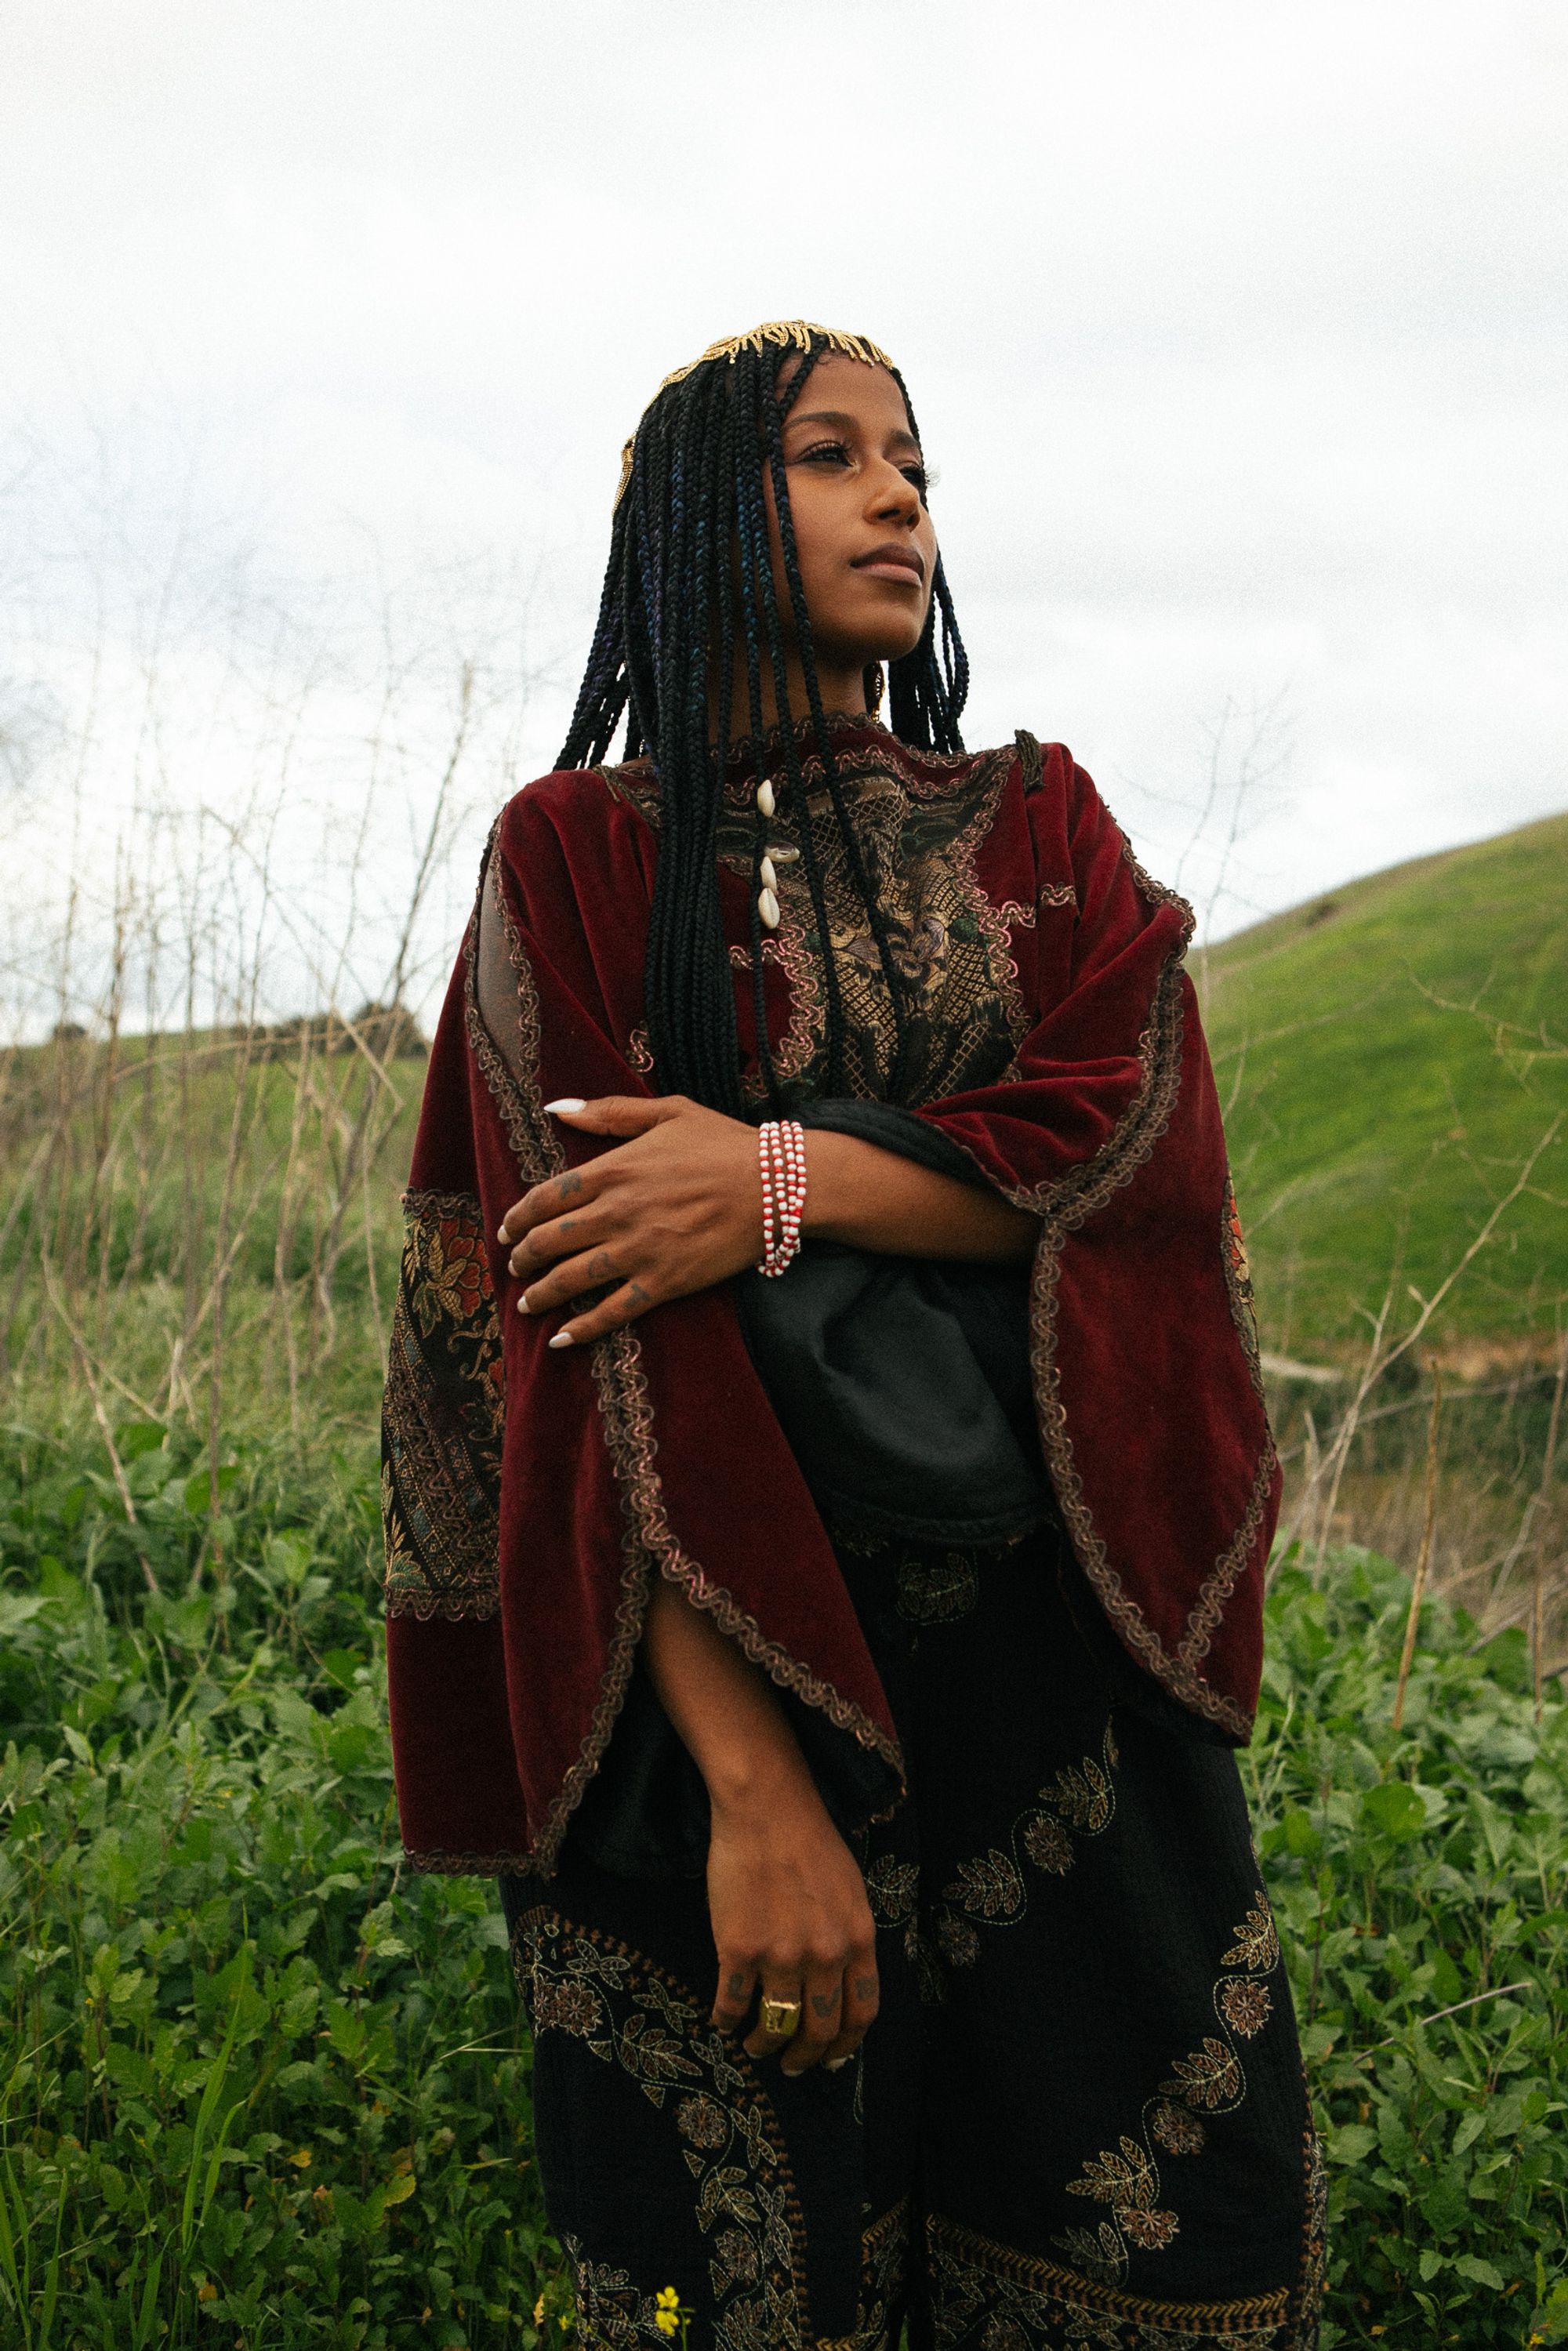 aja clothed in dark red robes in front of a lush green hill